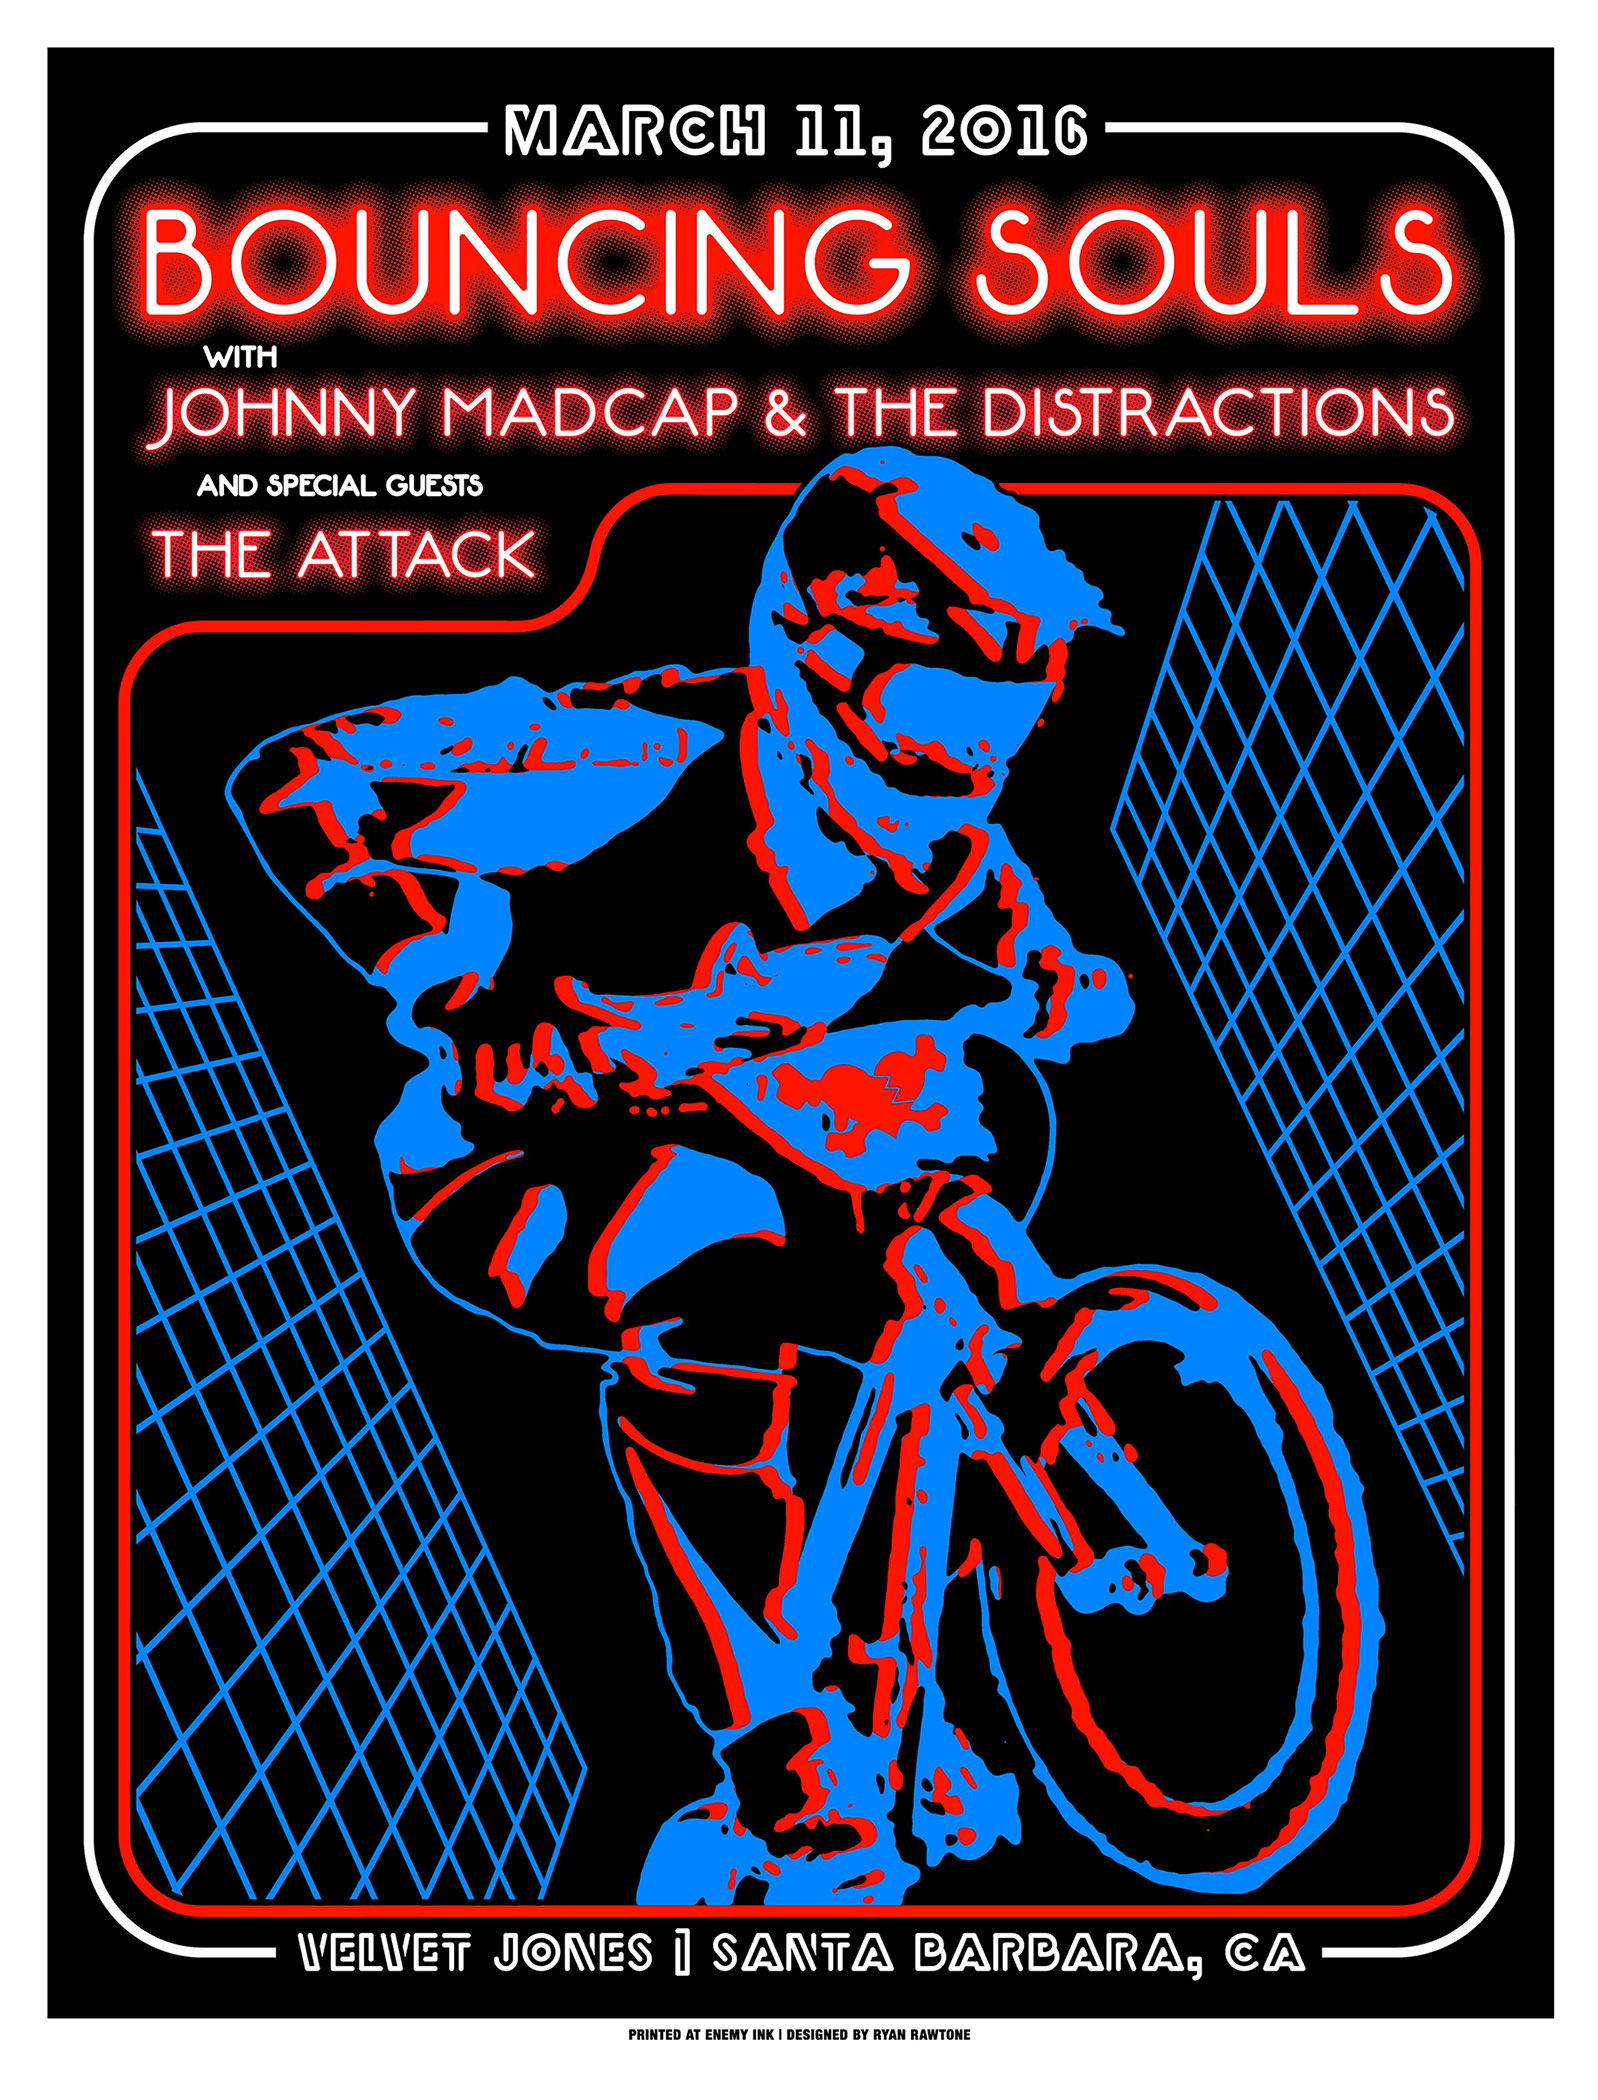 BouncingSouls_Attack_March-11-2016_poster